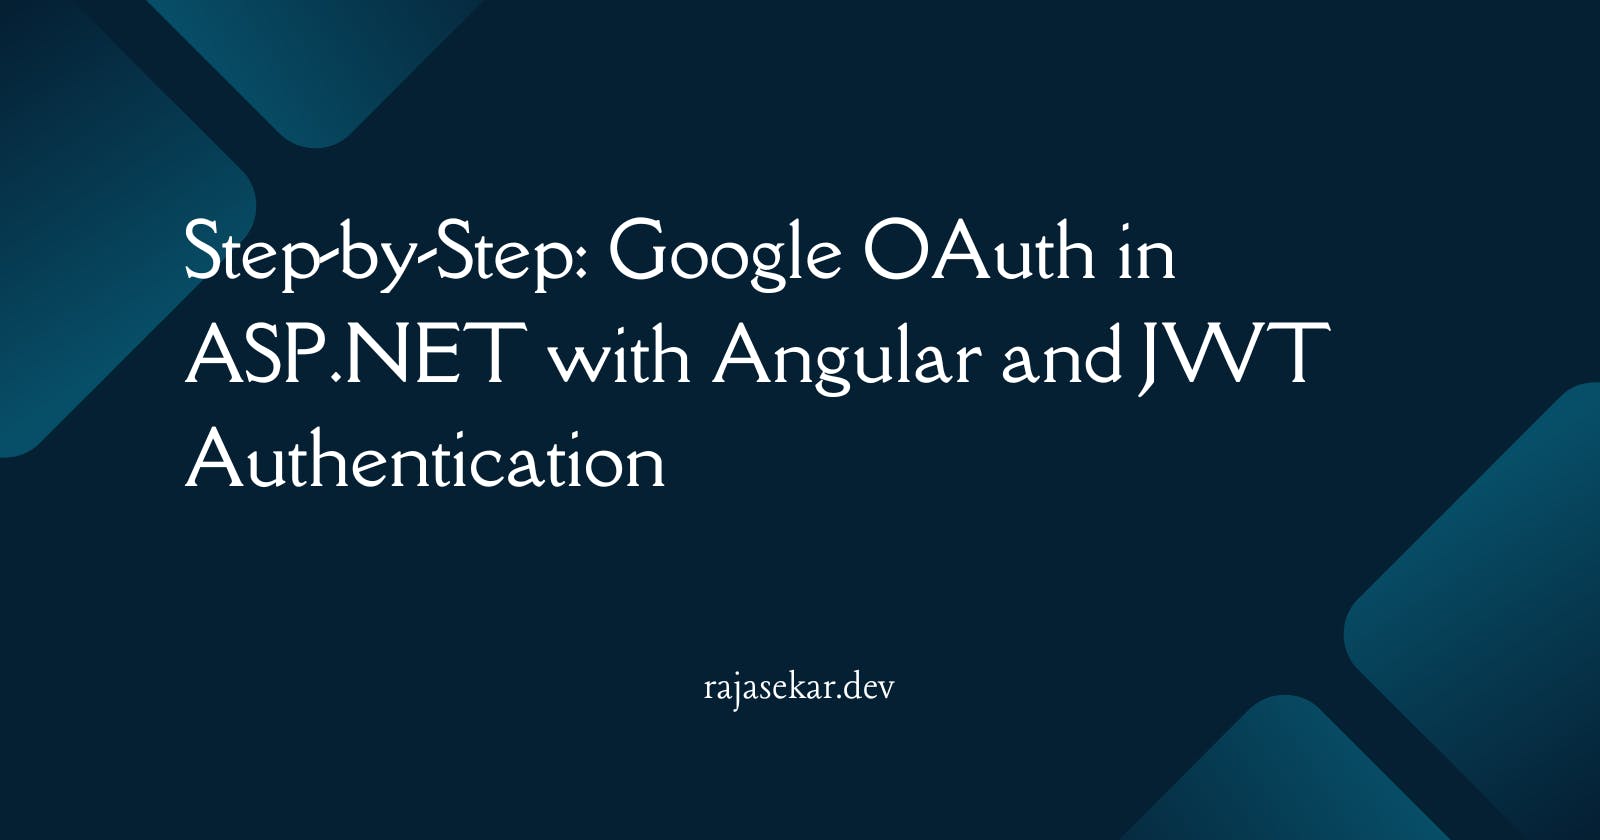 Step-by-Step: Google OAuth in ASP.NET with Angular and JWT Authentication